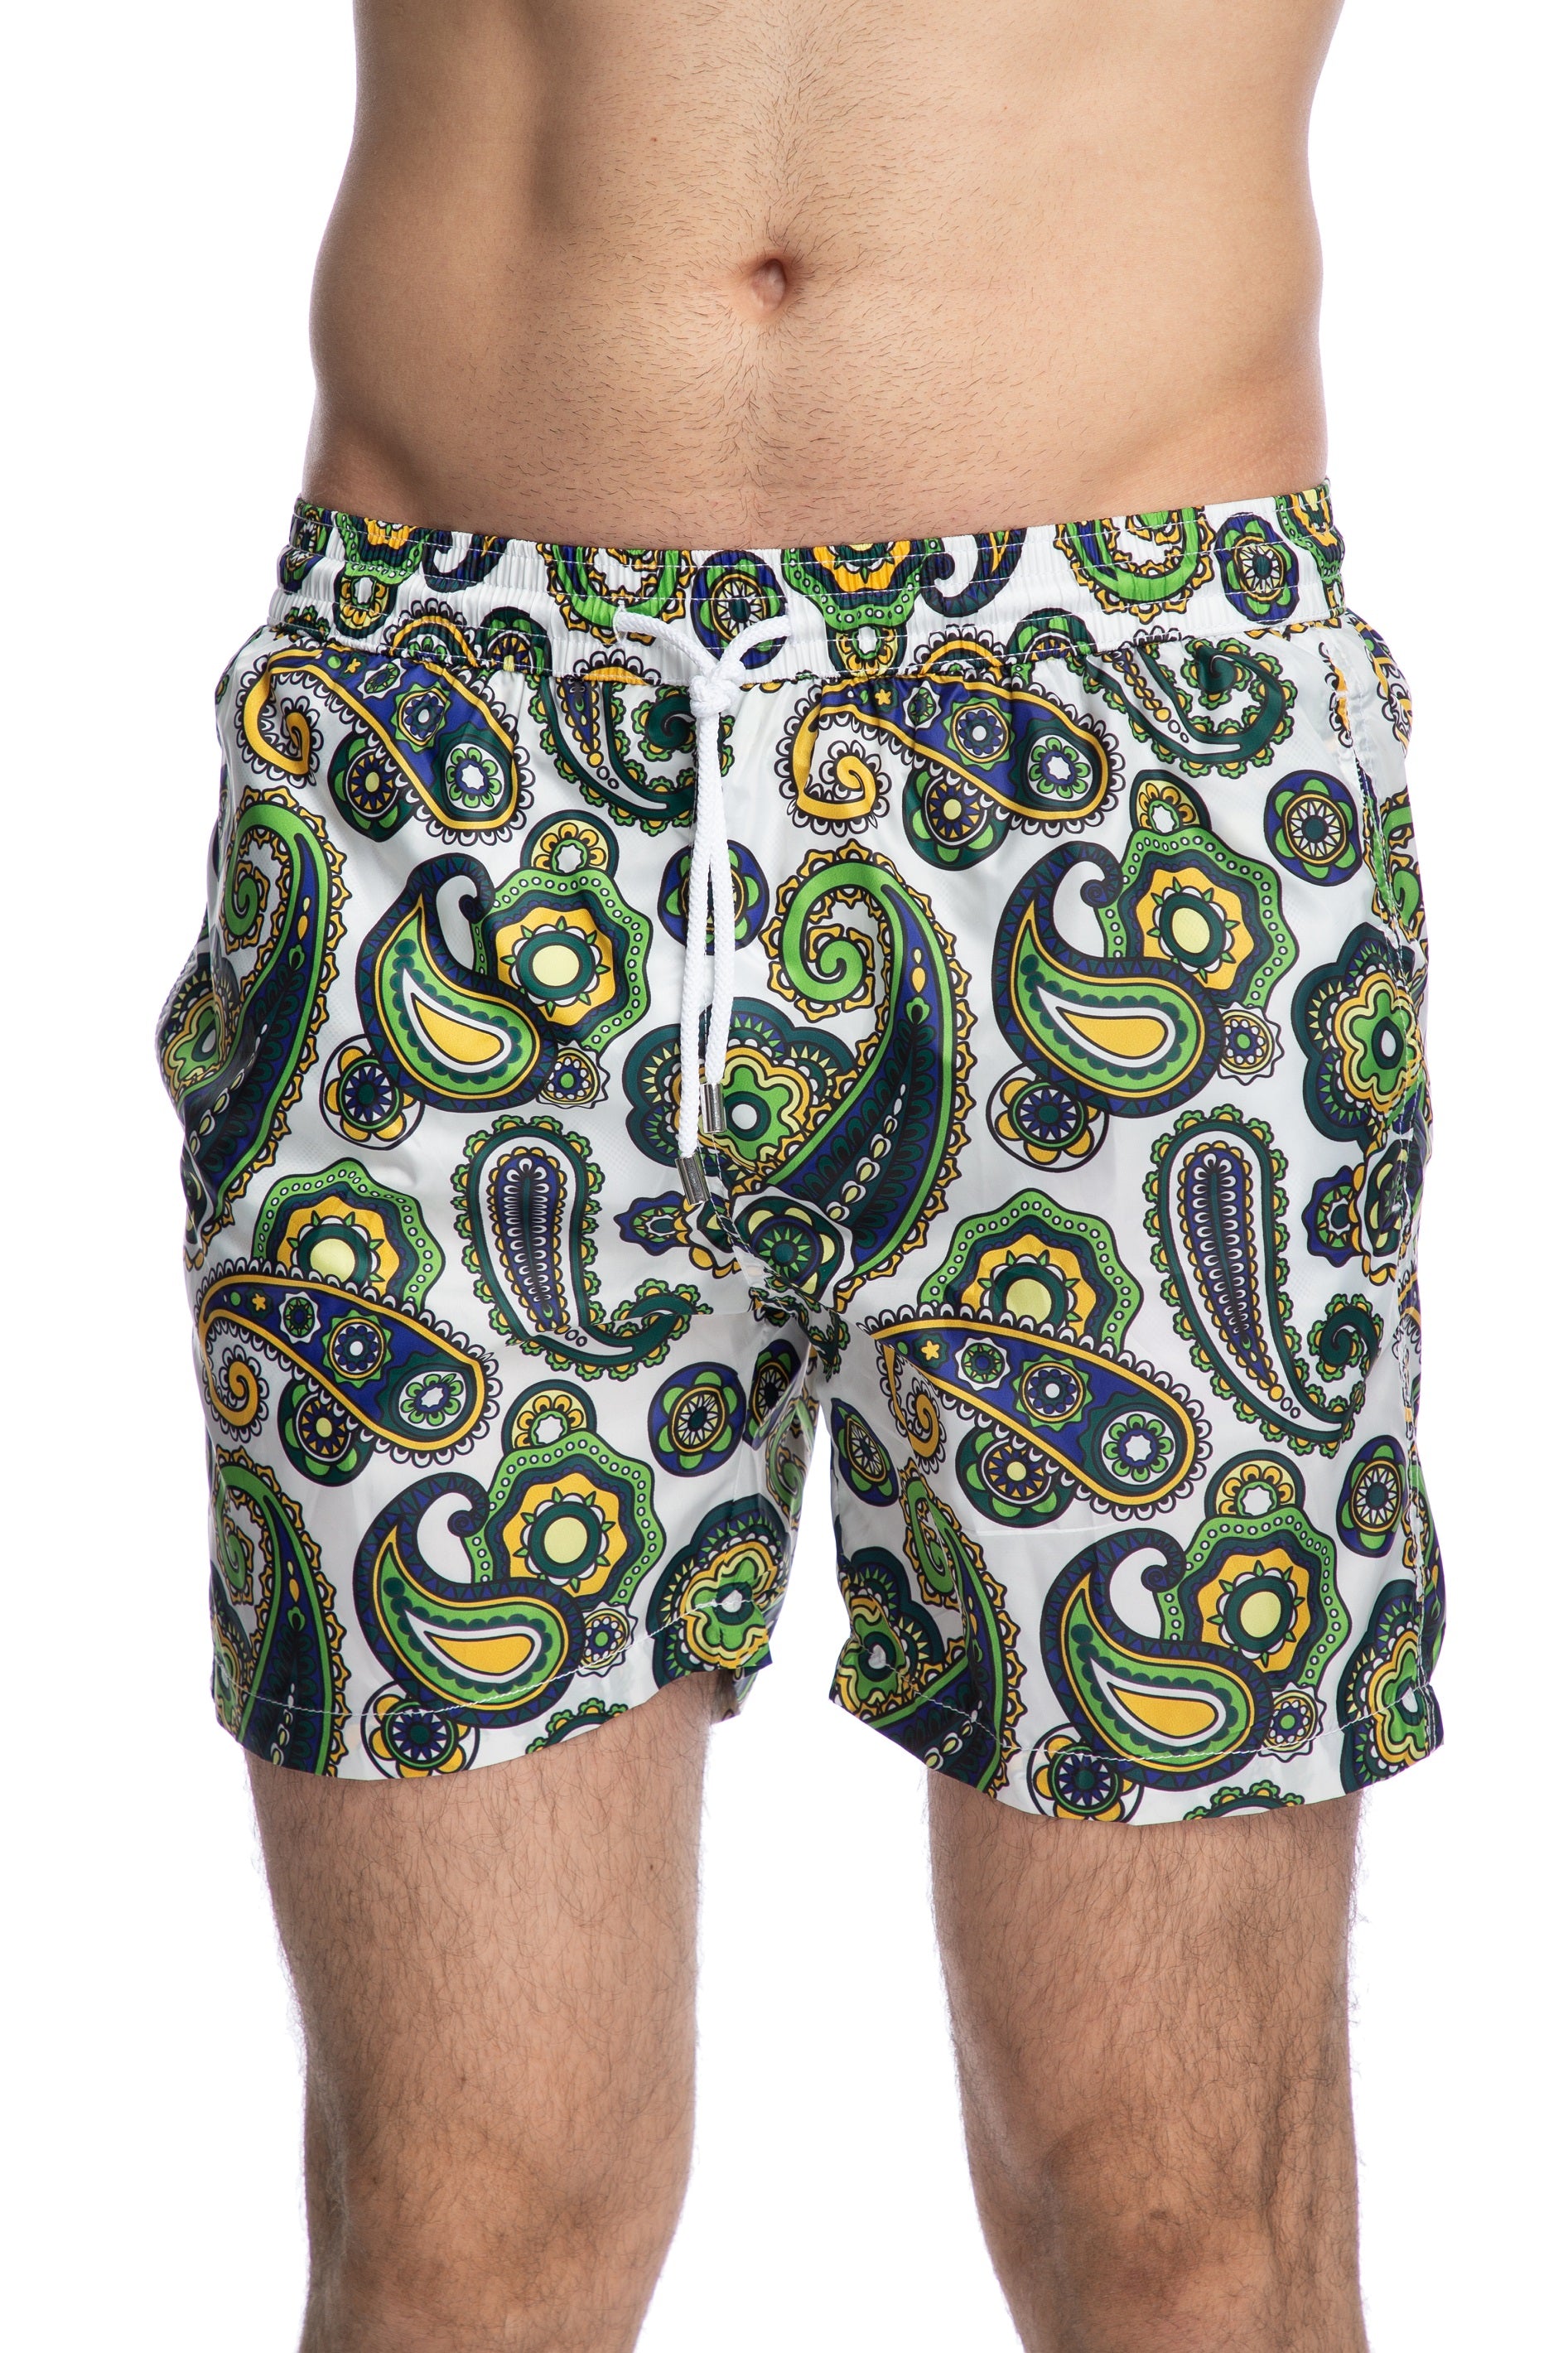 Green and purple swimming shorts